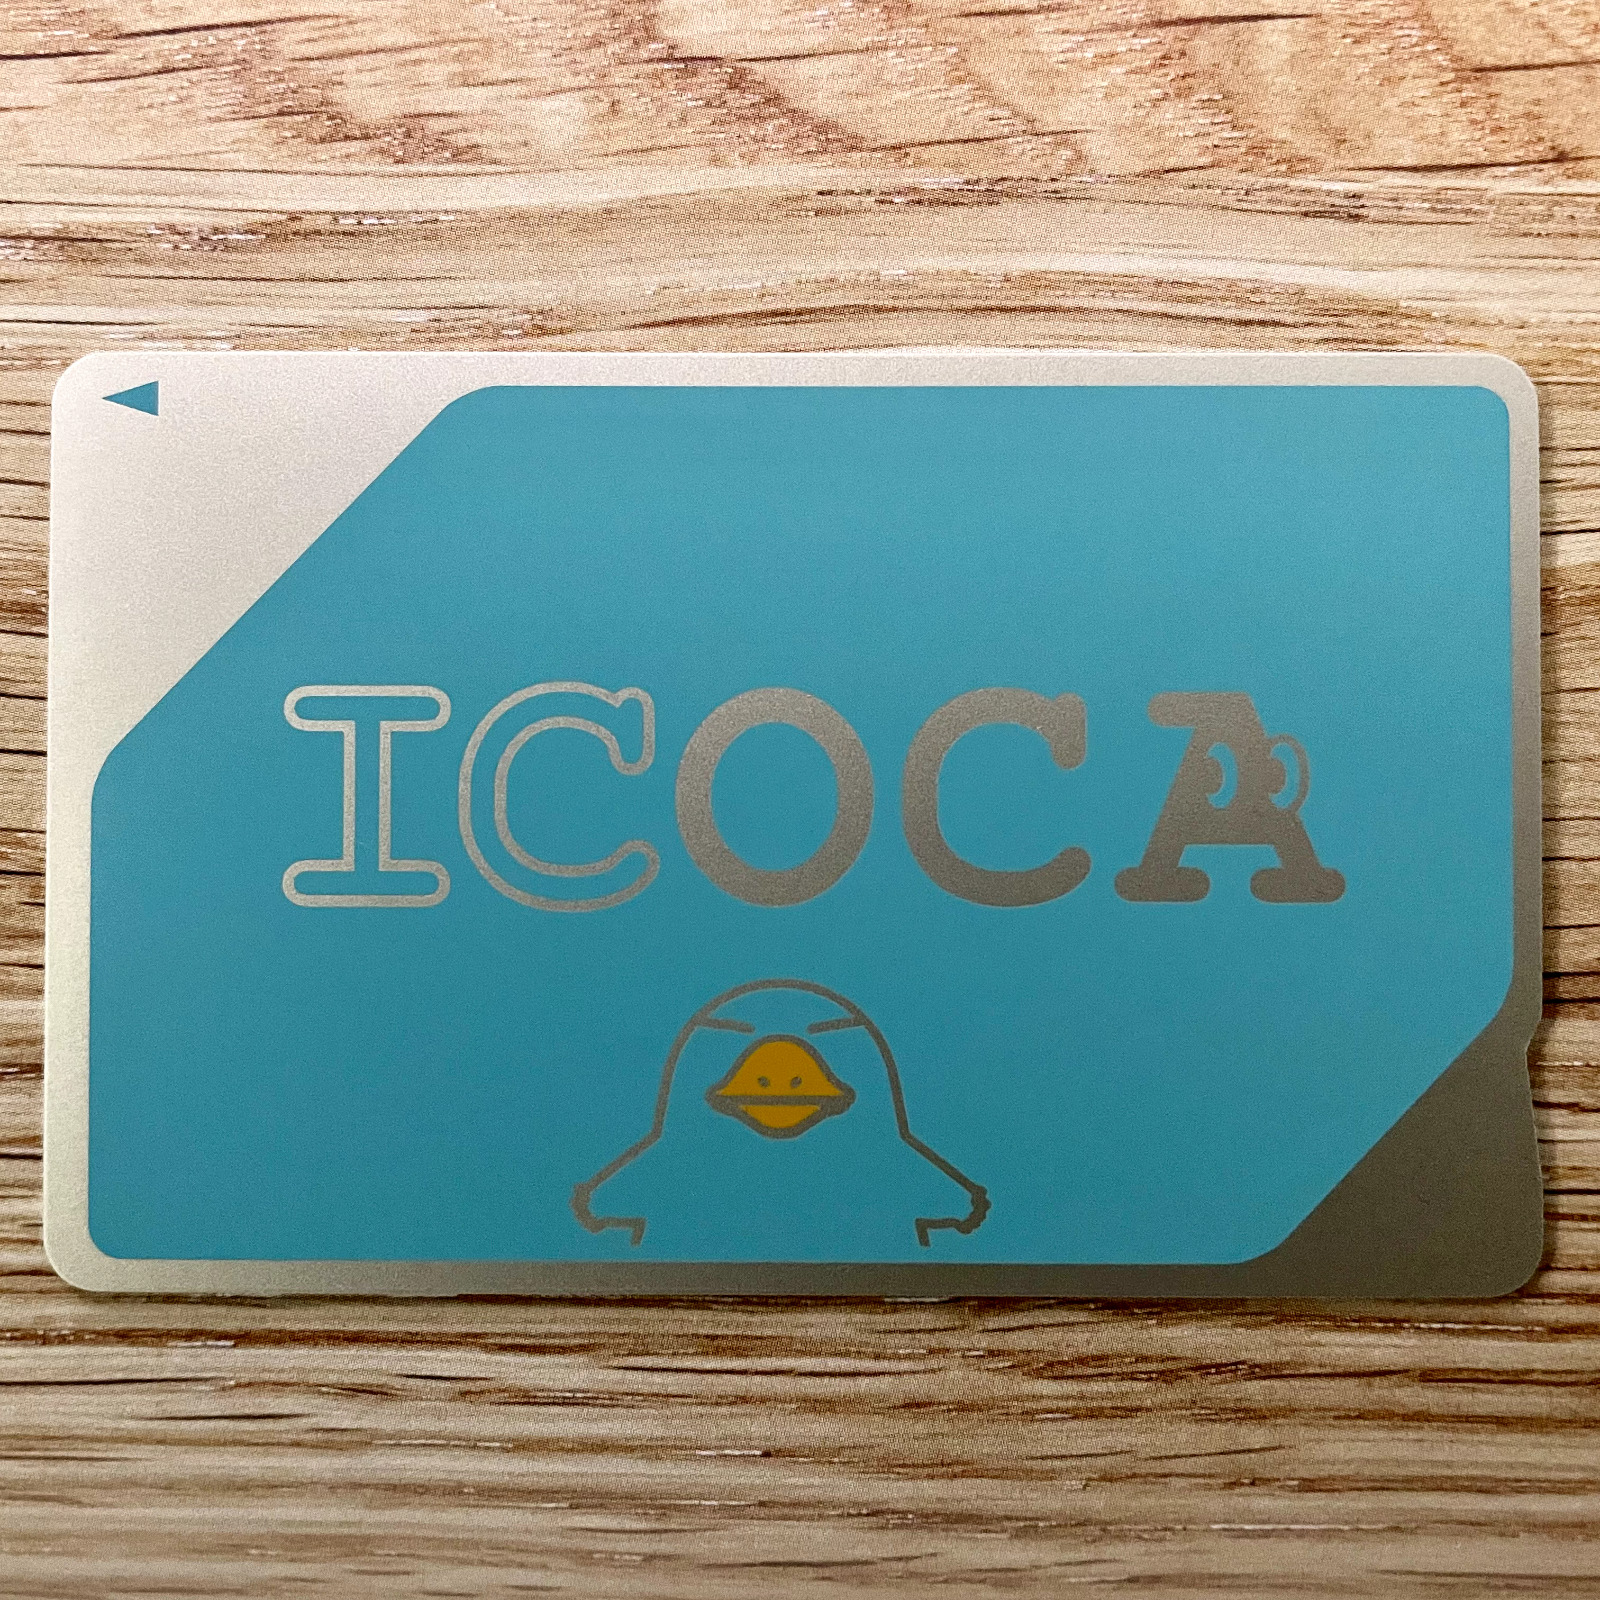 ¥500 pre-charged Brand-new ICOCHAN Normal ICOCA IC card Platypus Suica